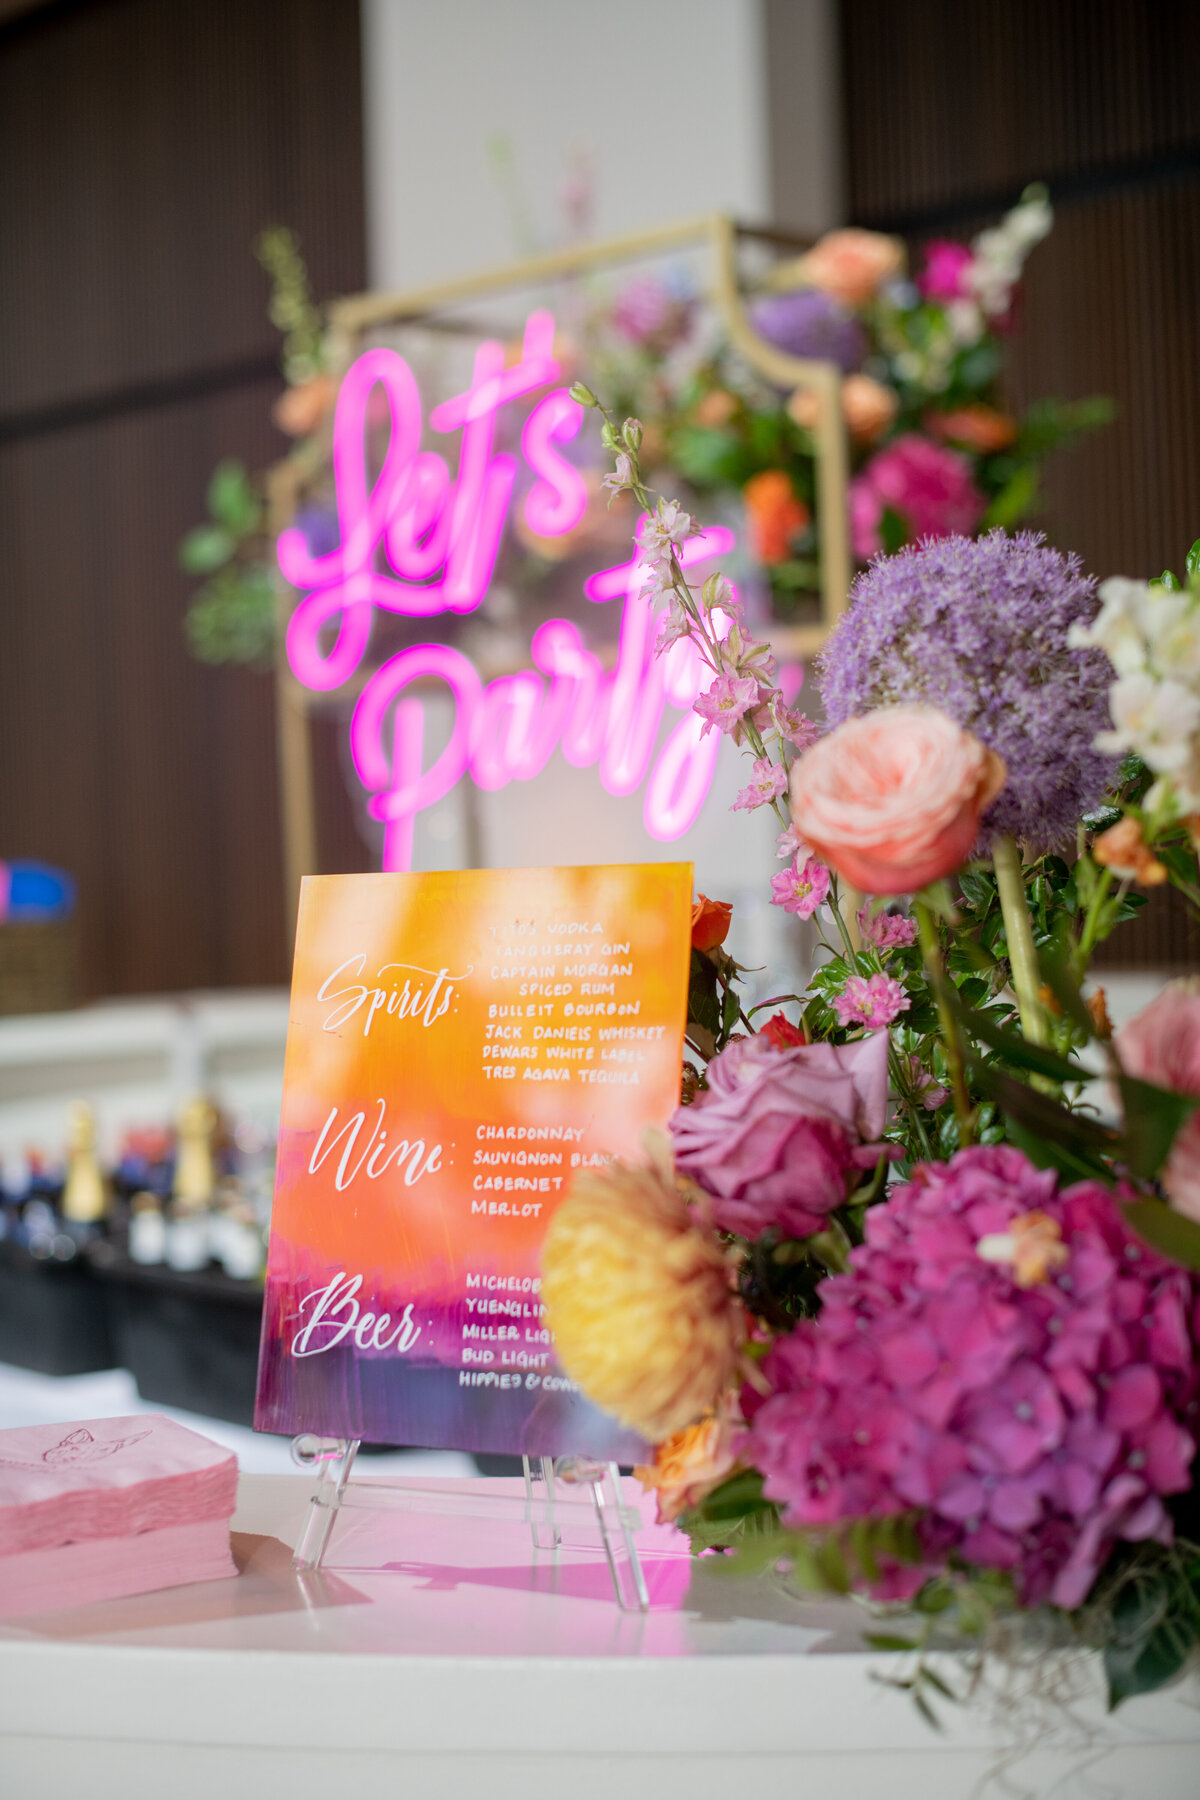 Cheerful sunset inspired summer wedding composed of petal heavy roses, garden roses, allium, orchids, ranunculus, eremurus, delphinium, and natural greenery creating hues of rosy pink, fuchsia, lavender, orange, and golden-yellow. Design by Rosemary and Finch in Nashville, TN.